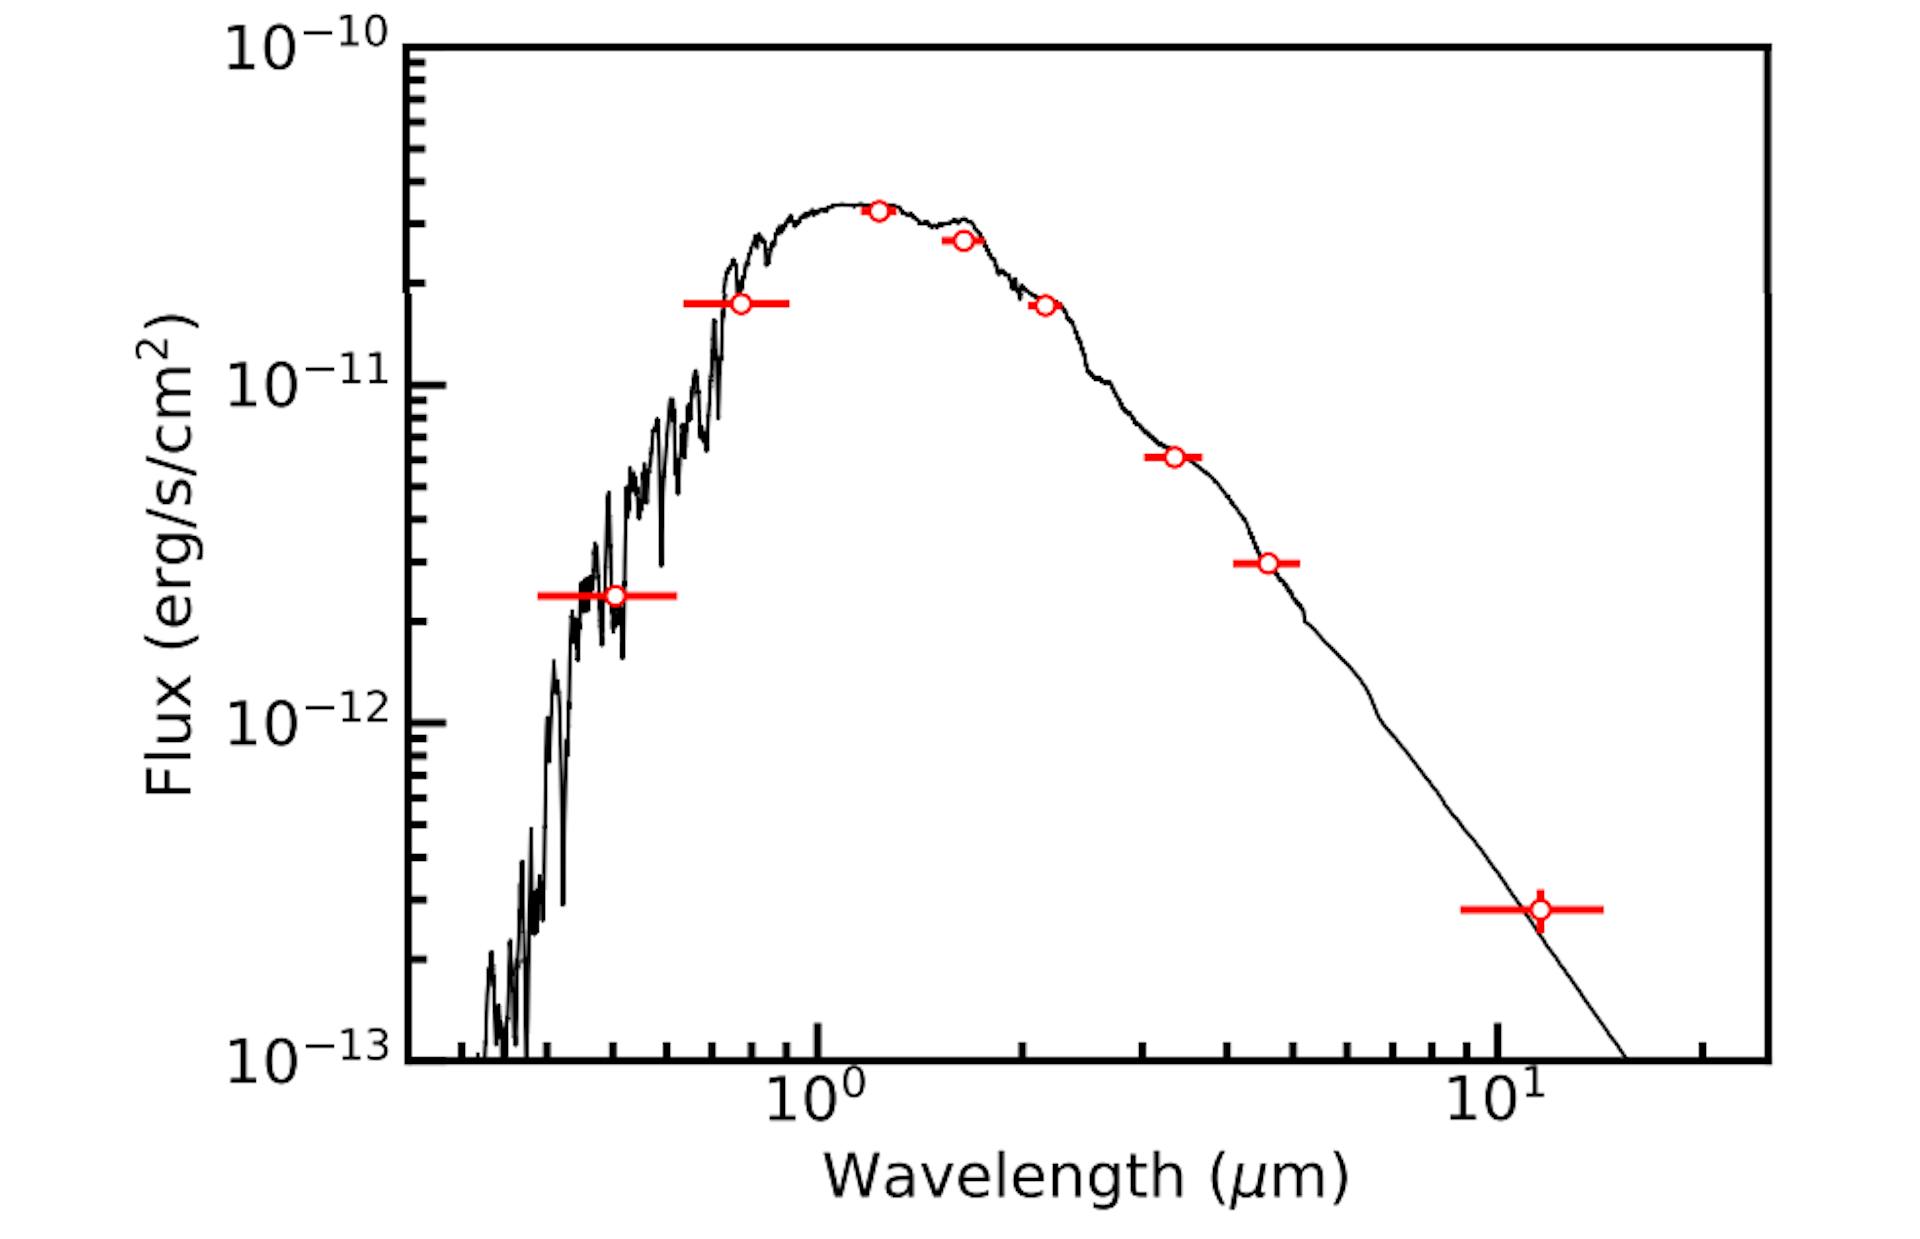 Figure 5. Spectral energy distribution of the host star. Photometric fluxes used in the stellar characterization analysis (i.e., GBP , GRP , J, H, Ks, W1, W2, and W3) are shown as points with x-errors illustrating the filter bandpasses. Flux uncertainties are generally smaller than the marker size. For comparison, a BT-Settl model spectrum (Allard et al. 2012) is shown (black line) for a star with Teff = 3300 K, log g = 5.0, and [Fe/H] = 0.0, parameters similar to those derived from our SED analysis (Section 3.1.1).